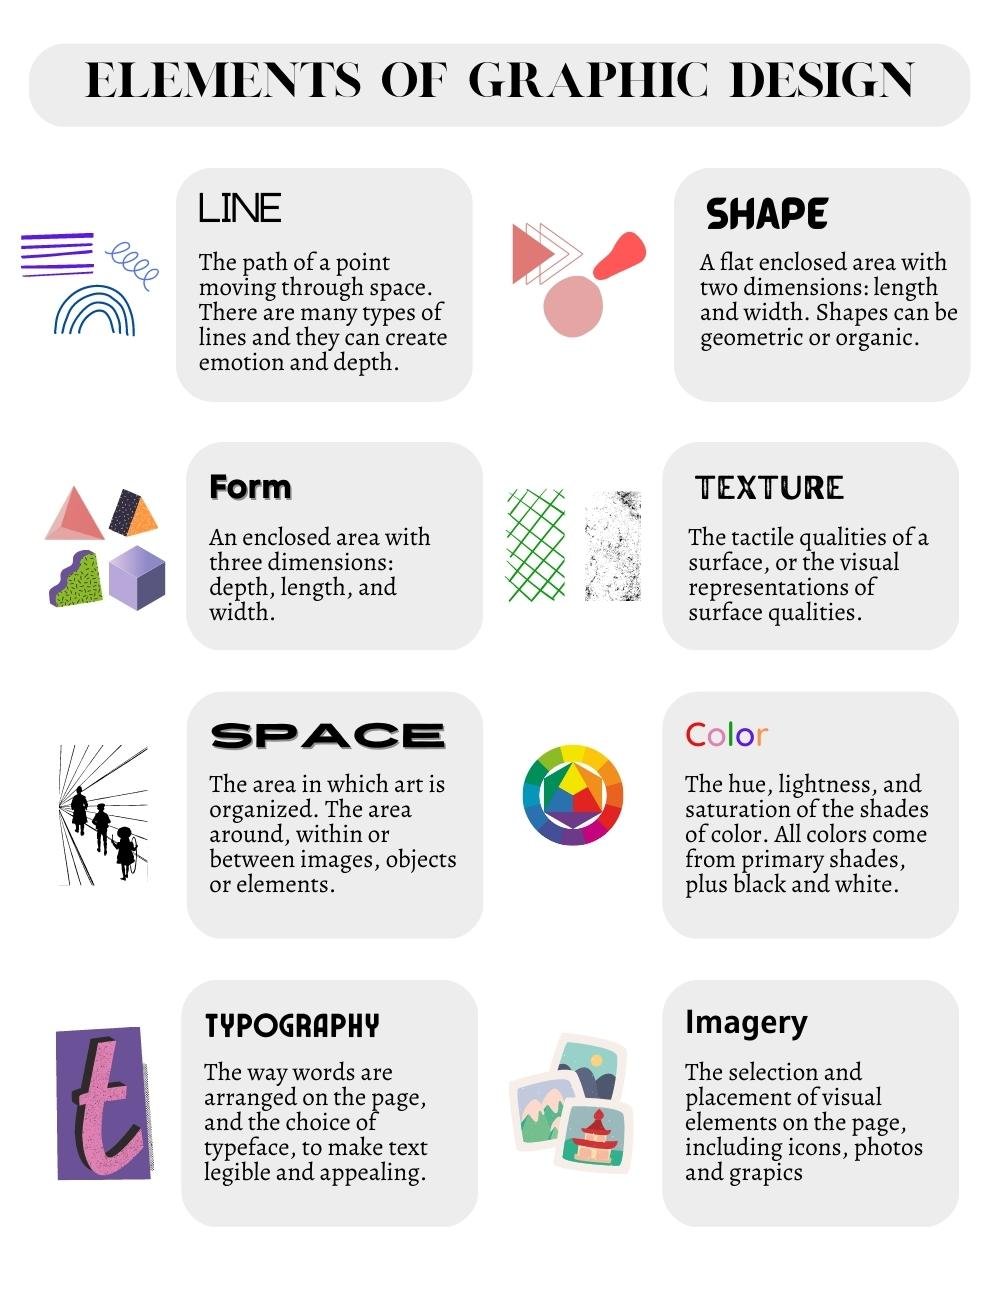 Why Shapes are Important for a Design? - Graphic Design Blogs